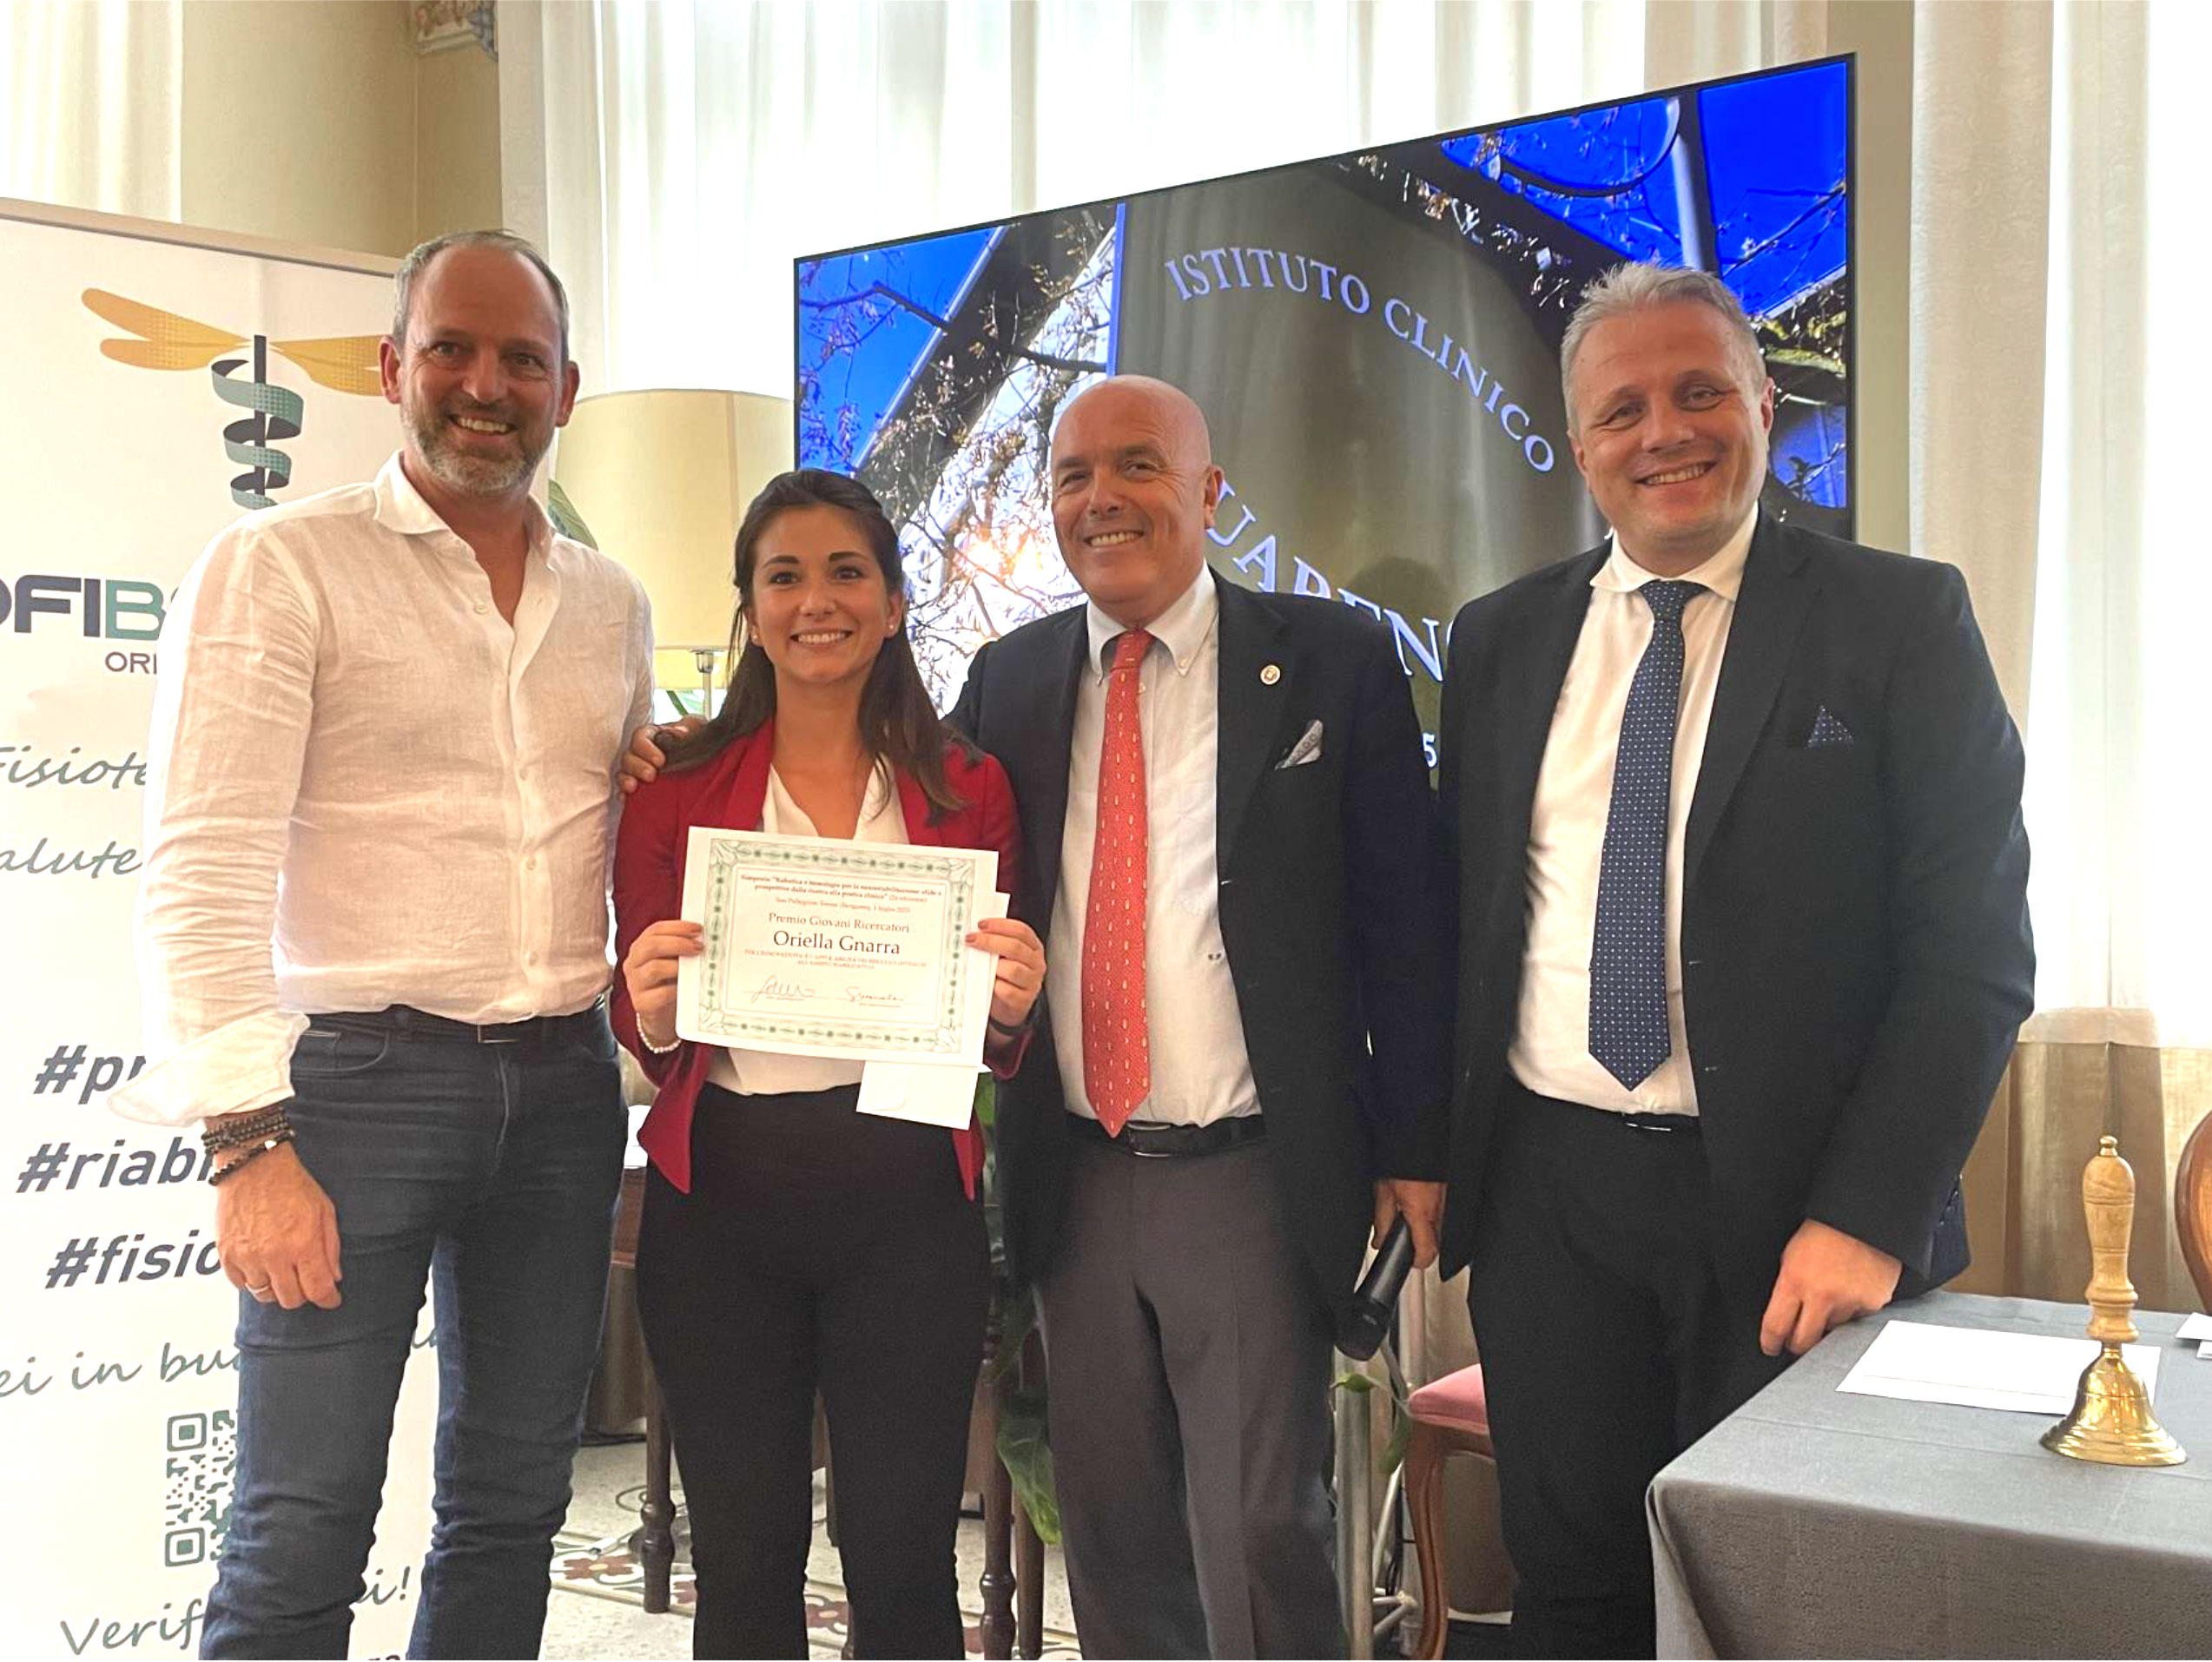 Young researcher award for Oriella Gnarra – Sensory-Motor Systems Lab ...